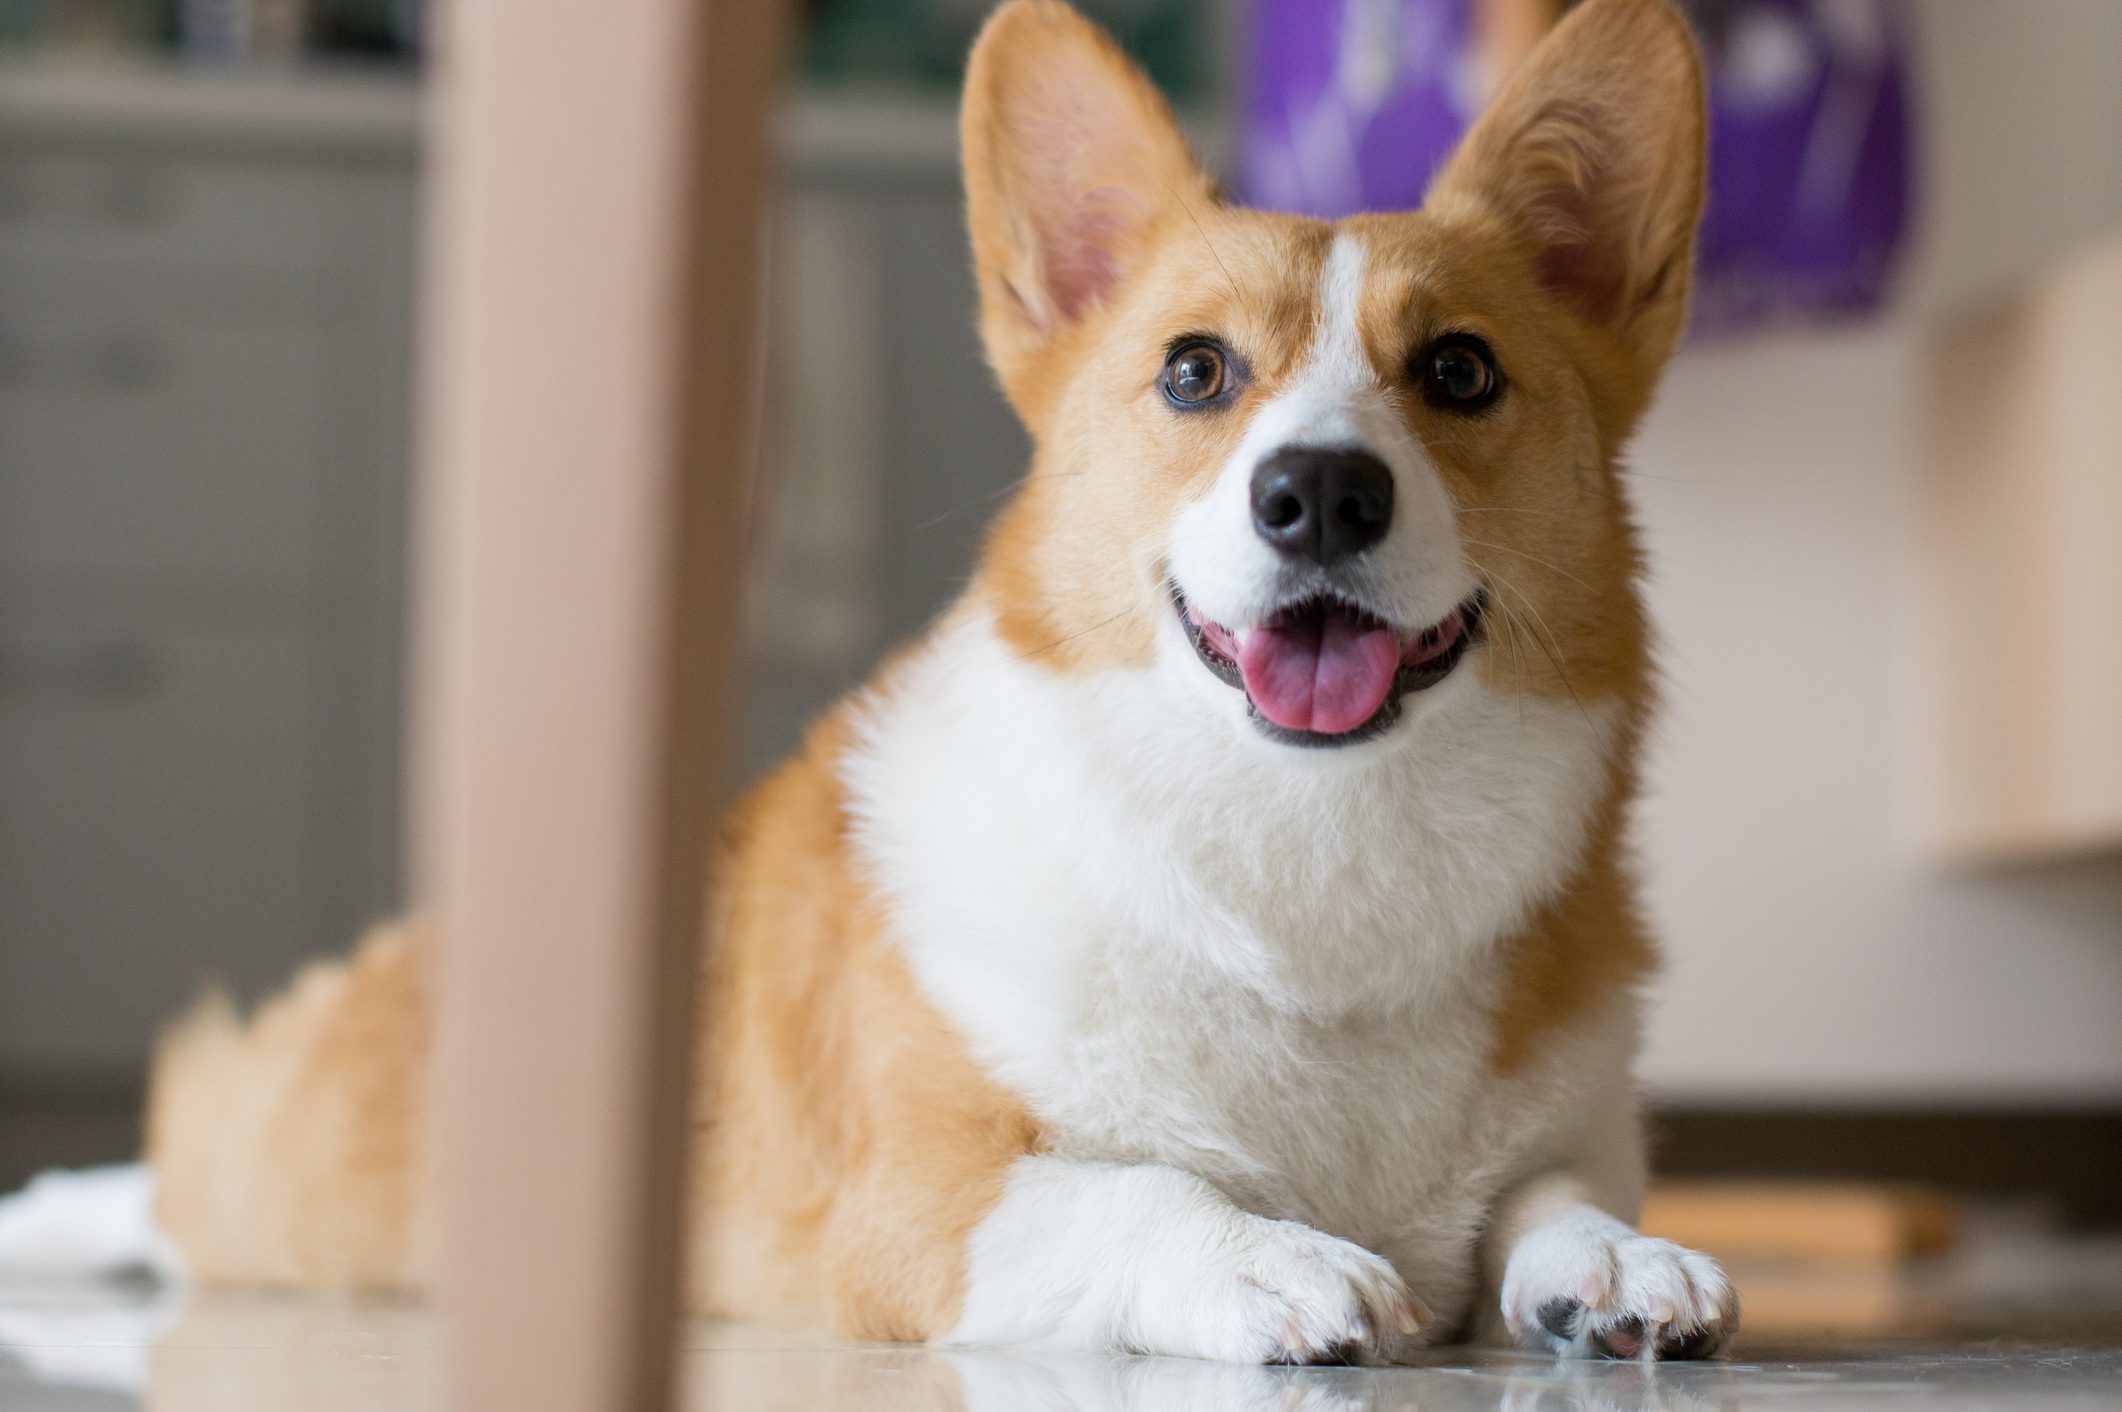 <h3>How do I know if my dog is unhappy?</h3> <p class="" align="left">"Dogs differ in how they express unhappiness," says Bekoff. They might have <a href="https://www.rd.com/article/lethargic-dog-signs-call-vet/" rel="noopener noreferrer">low energy</a>, seem uninterested and unenthusiastic or have a dragging gait. Dogs that feel neglected by not getting enough play time or not having their needs met will likely feel unhappy. Bekoff emphasizes the importance of observing your dog to understand their unique behavior patterns.</p> <h3>Are some breeds happier than others?</h3> <p class="" align="left">Breeds certainly have unique traits and quirks, but it would be a stretch to say that some breeds are happier than others. Individual dogs within any breed will have different personalities and behaviors. You can find happy (and unhappy) dogs within any breed.</p> <h2 class="">Why trust us</h2> <p>At <em>Reader's Digest</em>, we're committed to producing high-quality content by writers with expertise and experience in their field in consultation with relevant, qualified experts. For this piece, JoAnna Pendergrass, DVM, tapped her experience as a veterinarian and freelance medical writer, and then <span>Wailani Sung, DVM, a veterinarian who <span>owns Bay Area Vet Behavior</span>,</span> gave it a rigorous review to ensure that all information is accurate and offers the best possible advice to readers. We verify all facts and data, back them with credible sourcing and revisit them over time to ensure they remain accurate and up to date. Read more about our <a title="https://www.rd.com/our-editorial-team/" href="https://www.rd.com/our-editorial-team/" rel="noopener noreferrer">team</a>, our contributors and our <a title="https://www.rd.com/about-readers-digest/" href="https://www.rd.com/about-readers-digest/" rel="noopener noreferrer">editorial policies</a>.</p> <p class="" align="left"><strong>Sources:</strong></p> <ul> <li><a href="https://marcbekoff.com/" rel="noopener noreferrer">Marc Bekoff</a>, PhD, animal behaviorist and professor emeritus of ecology and evolutionary biology at the University of Colorado; email interview, March 20, 2024</li> <li><a href="https://www.ncbi.nlm.nih.gov/pmc/articles/PMC7506079/" rel="noopener noreferrer"><em>Frontiers in Psychology</em></a>: "Where do we stand in the domestic dog (Canis familiaris) positive-emotion assessment: A State-of-the-Art review and future directions"</li> <li><a href="https://www.psychologytoday.com/us/blog/fellow-creatures/202004/why-dogs-happiness-matters" rel="noopener noreferrer">Psychology Today</a>: "Why Dogs' Happiness Matters"</li> <li><a href="https://avmajournals.avma.org/view/journals/javma/259/10/javma.20.08.0462.xml" rel="noopener noreferrer"><em>Journal of the American Veterinary Medical Association</em></a>: "Review of epidemiological, pathological, genetic, and epigenetic factors that may contribute to the development of separation anxiety in dogs"</li> <li><a href="https://www.science.org/doi/10.1126/science.1261022" rel="nofollow noopener noreferrer"><em>Science</em></a>: "Oxytocin-gaze positive loop and the coevolution of human-dog bonds"</li> </ul>